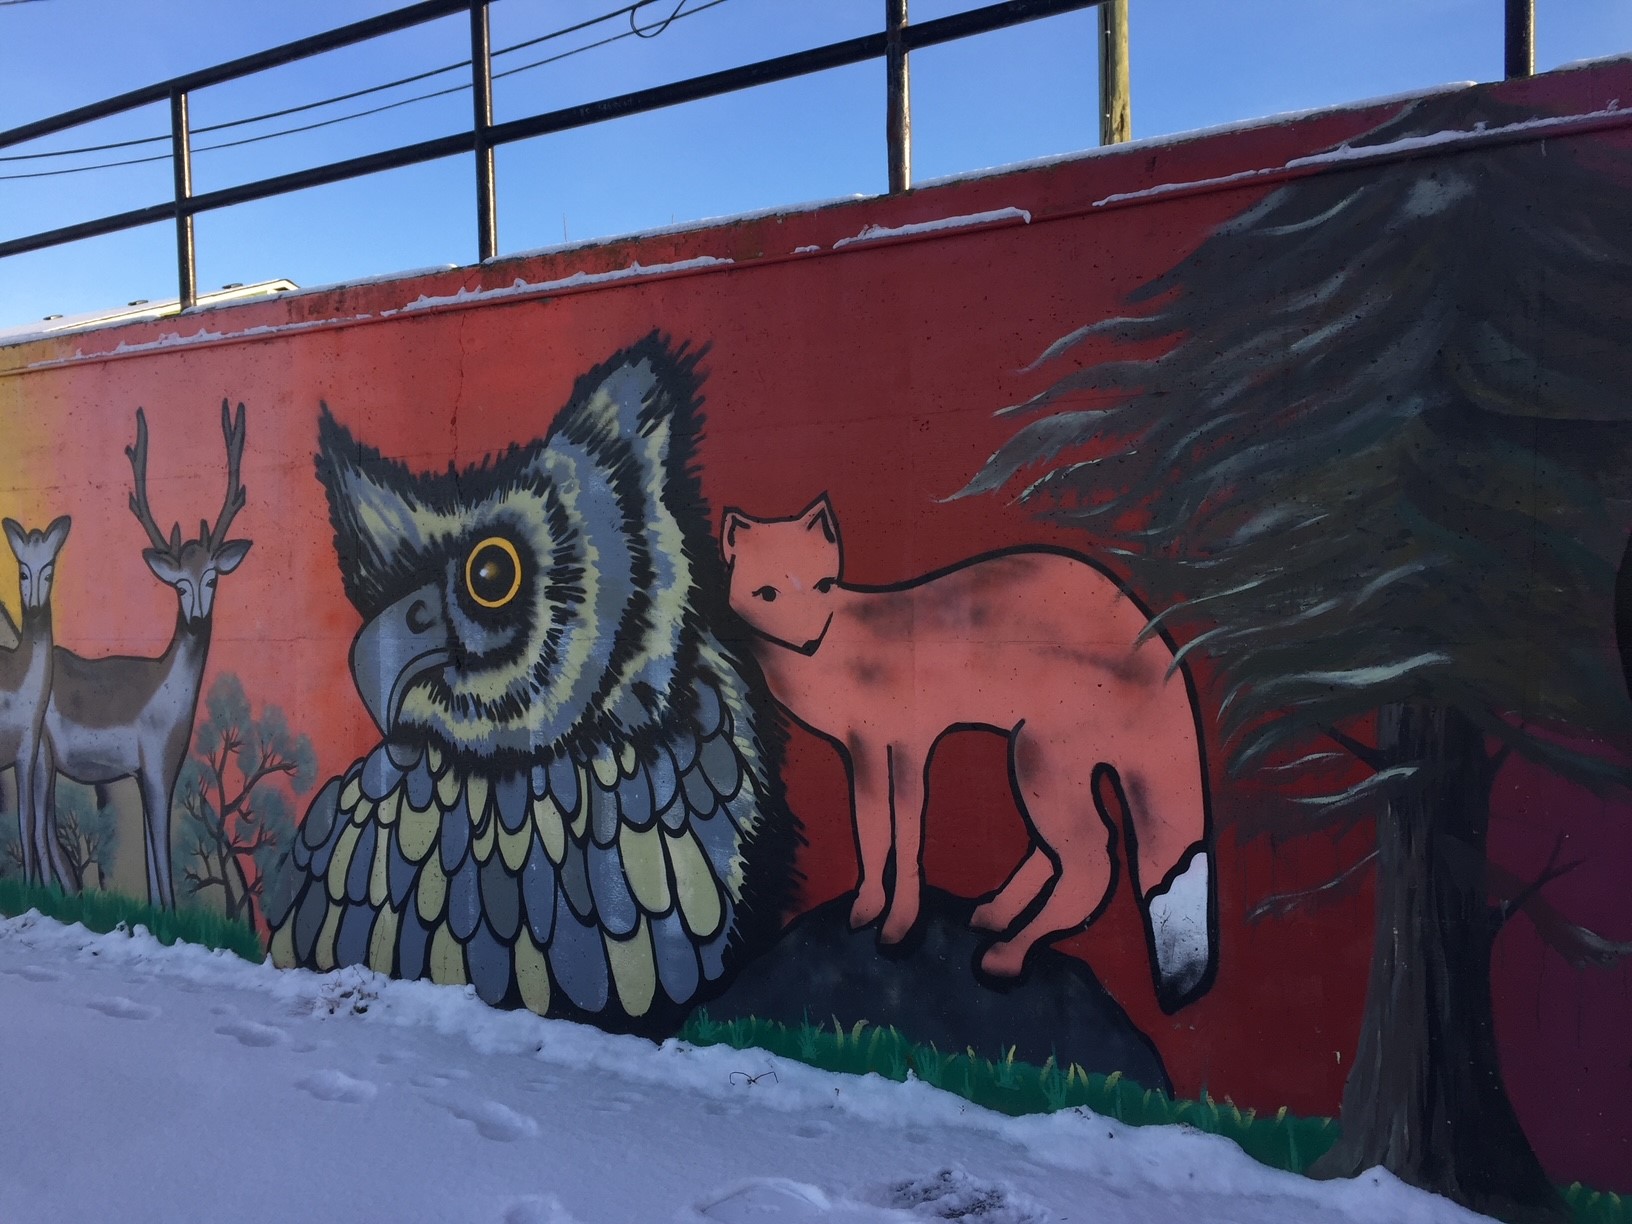 A mural painted by Chris